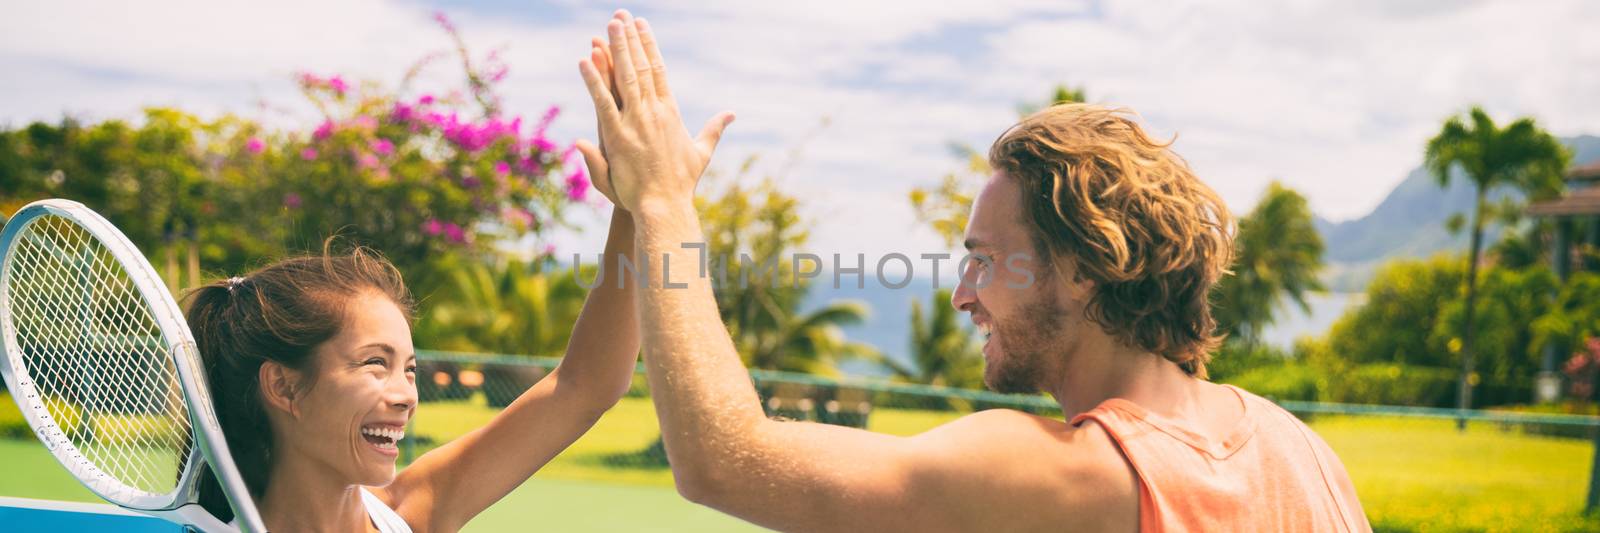 Summer sport tennis players having fun doing high five after game. Healthy lifestyle outdoor living mixed doubles banner panorama by Maridav